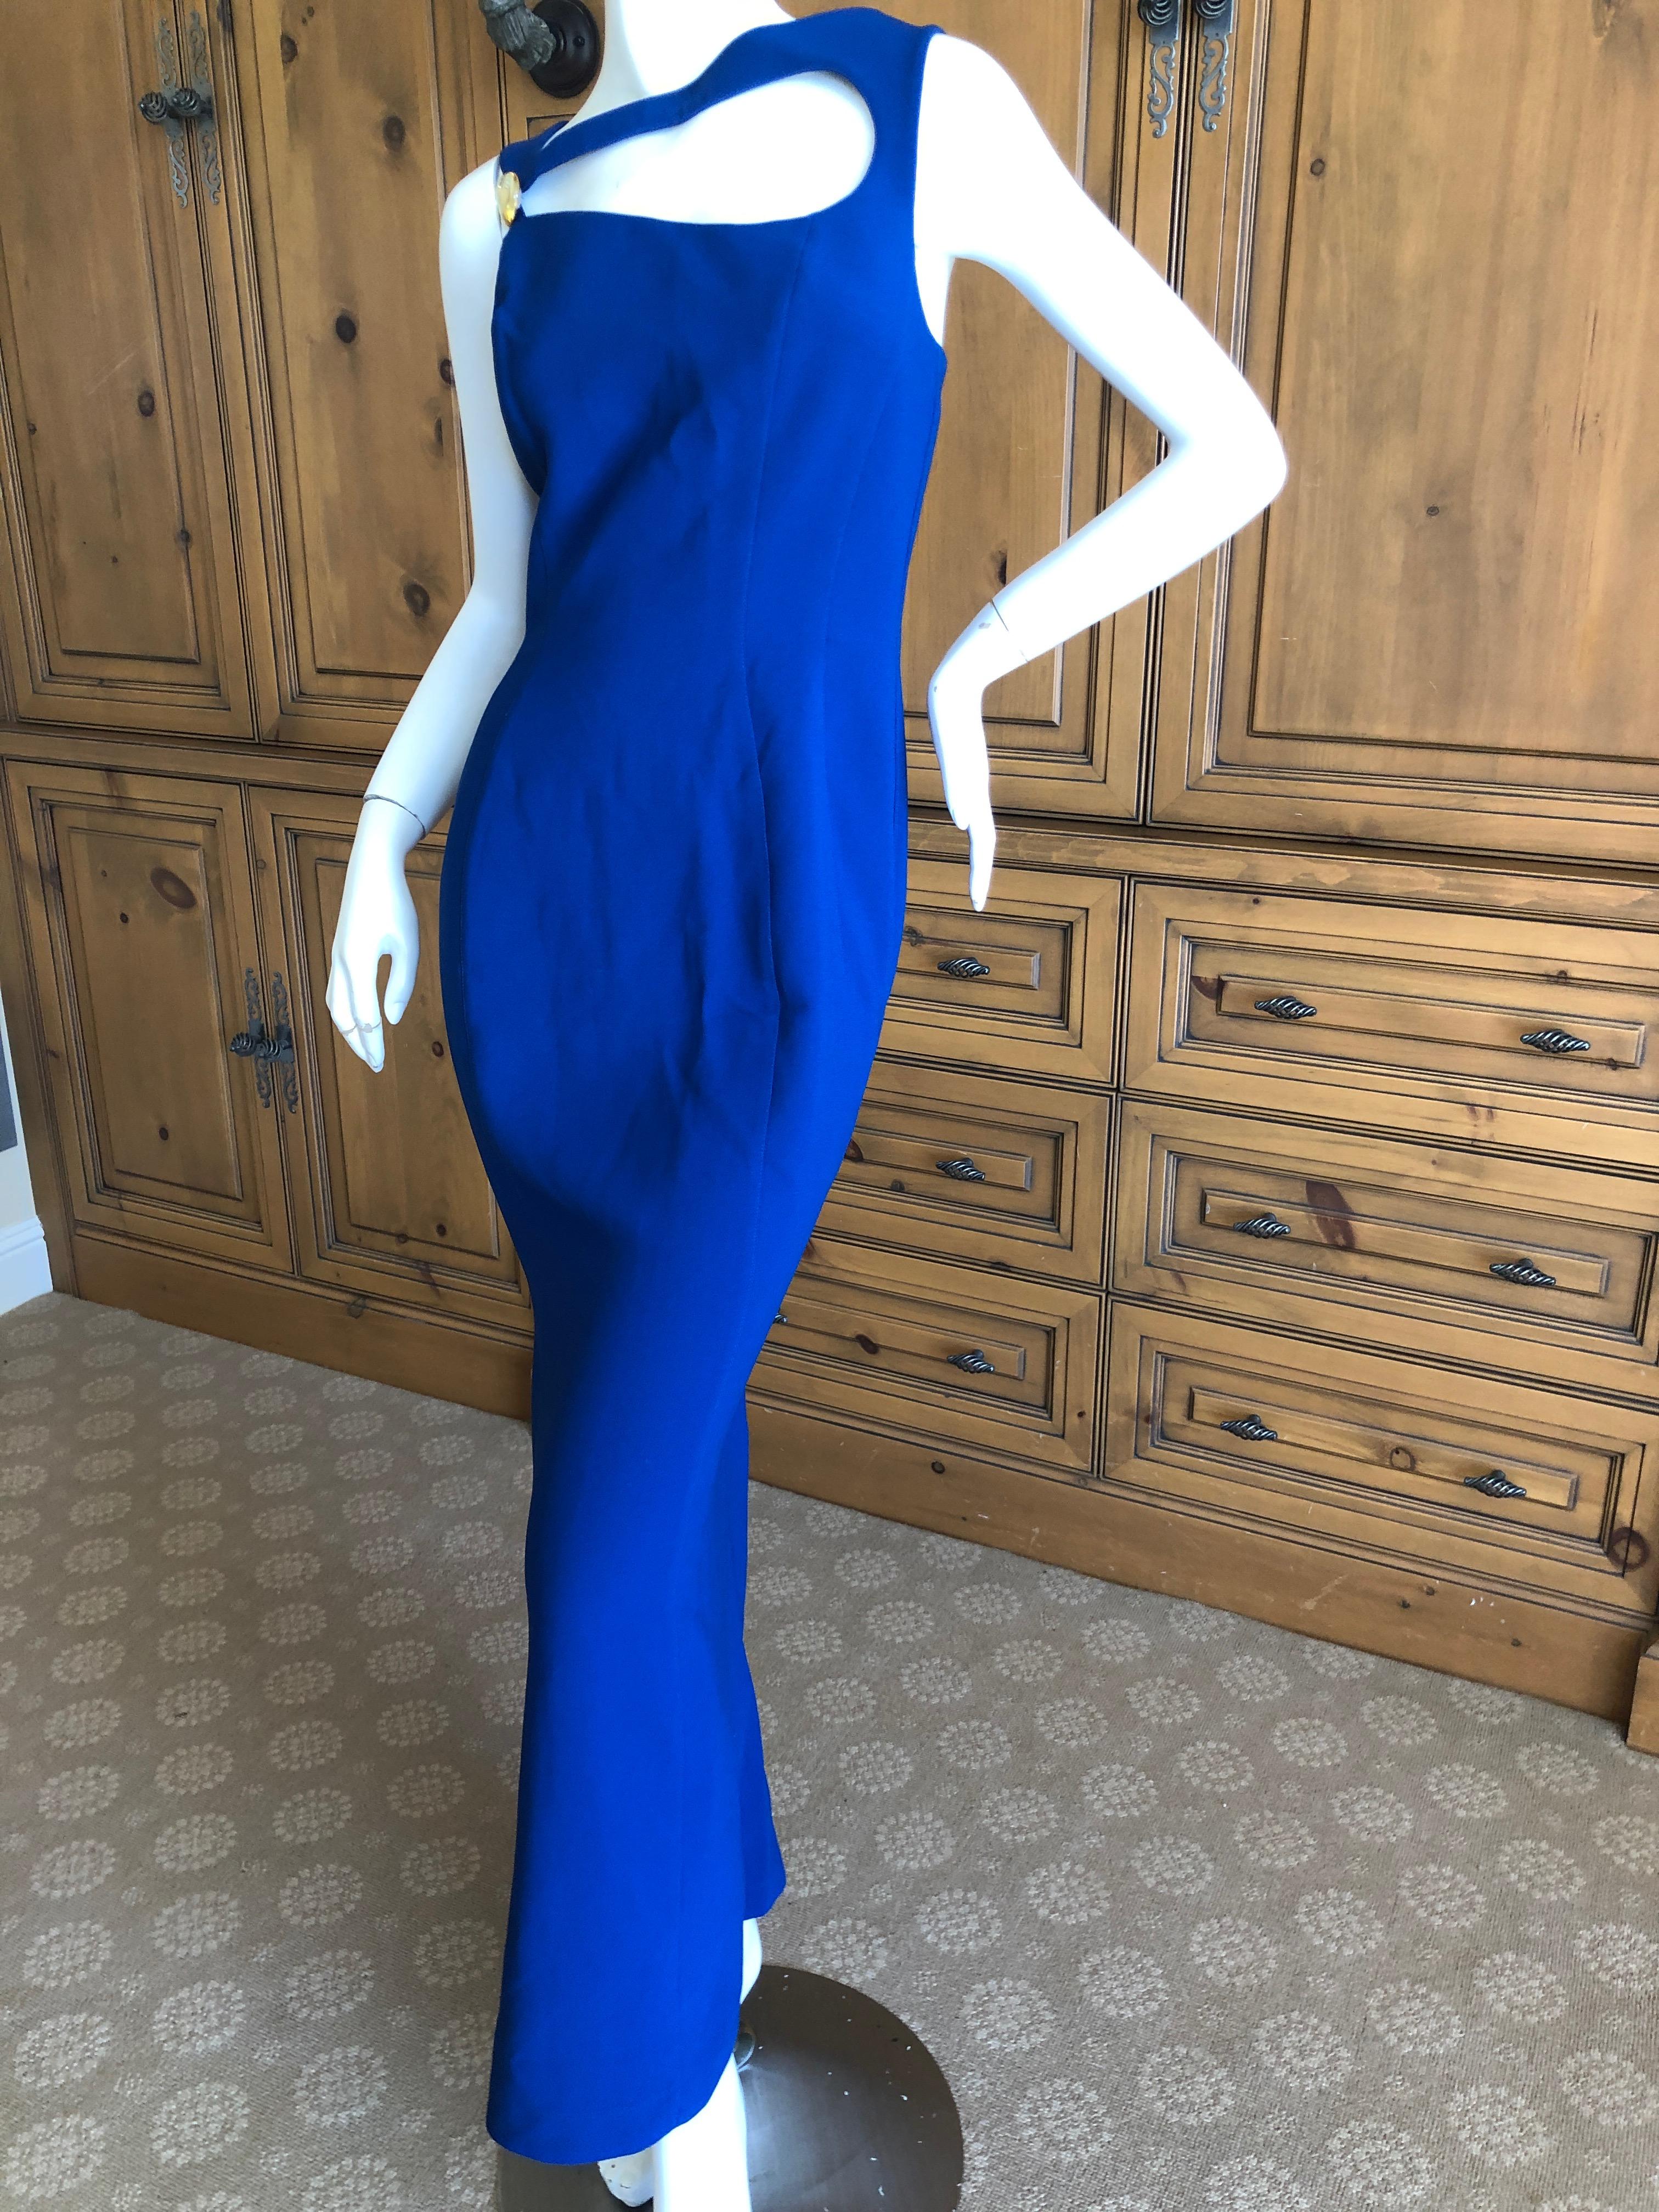 Thierry Mugler Vintage 1980's Royal Blue Cut Out Maxi Dress
Size 44 (?) there is no size tag
  Bust 40